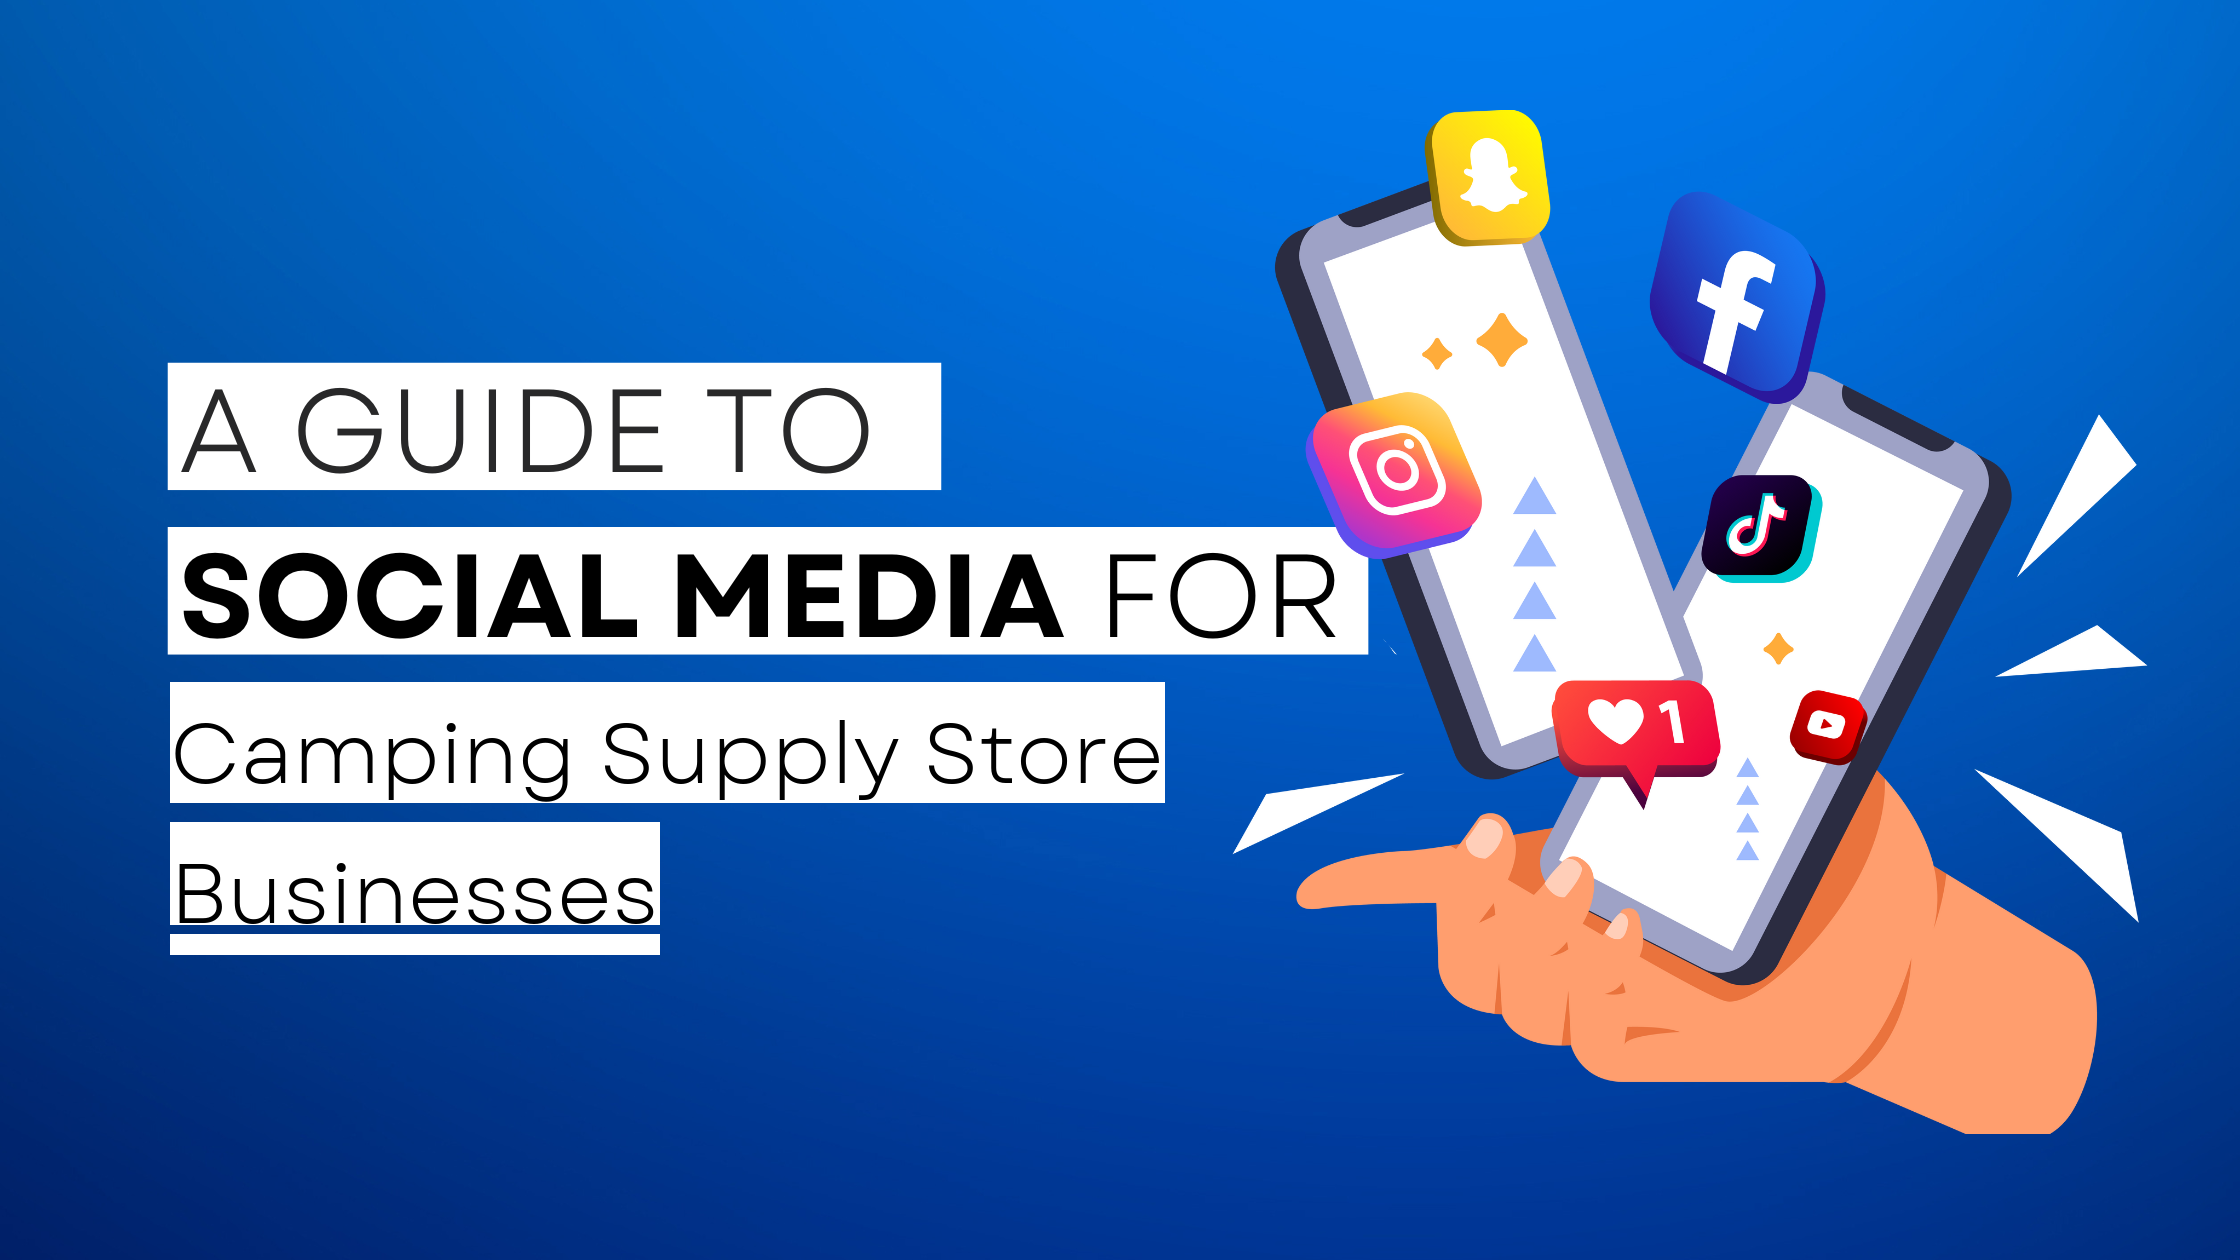 How to start Camping Supply Store on social media